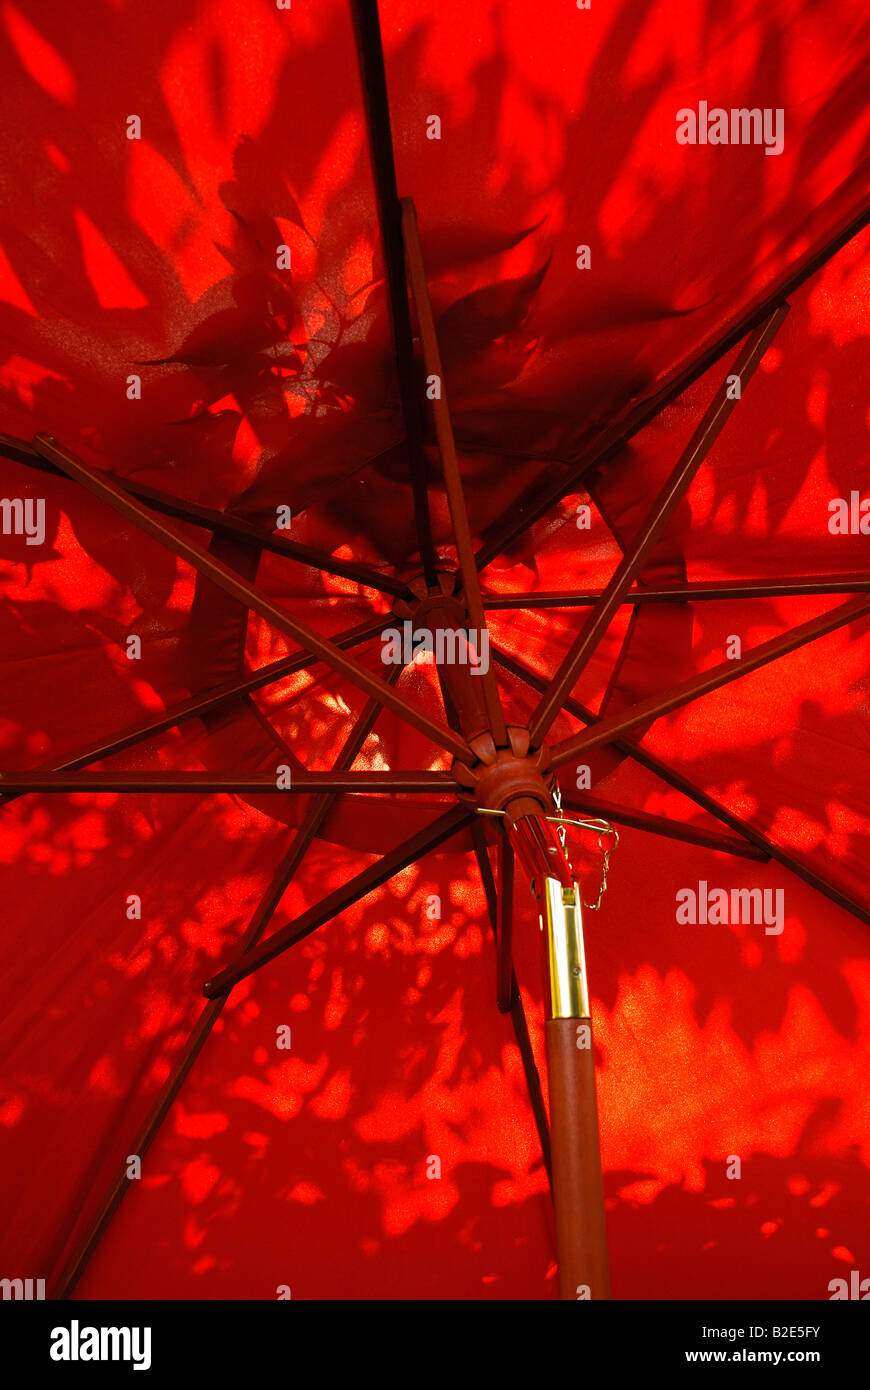 red garden parasol with leaf patterns and sunlight. Stock Photo